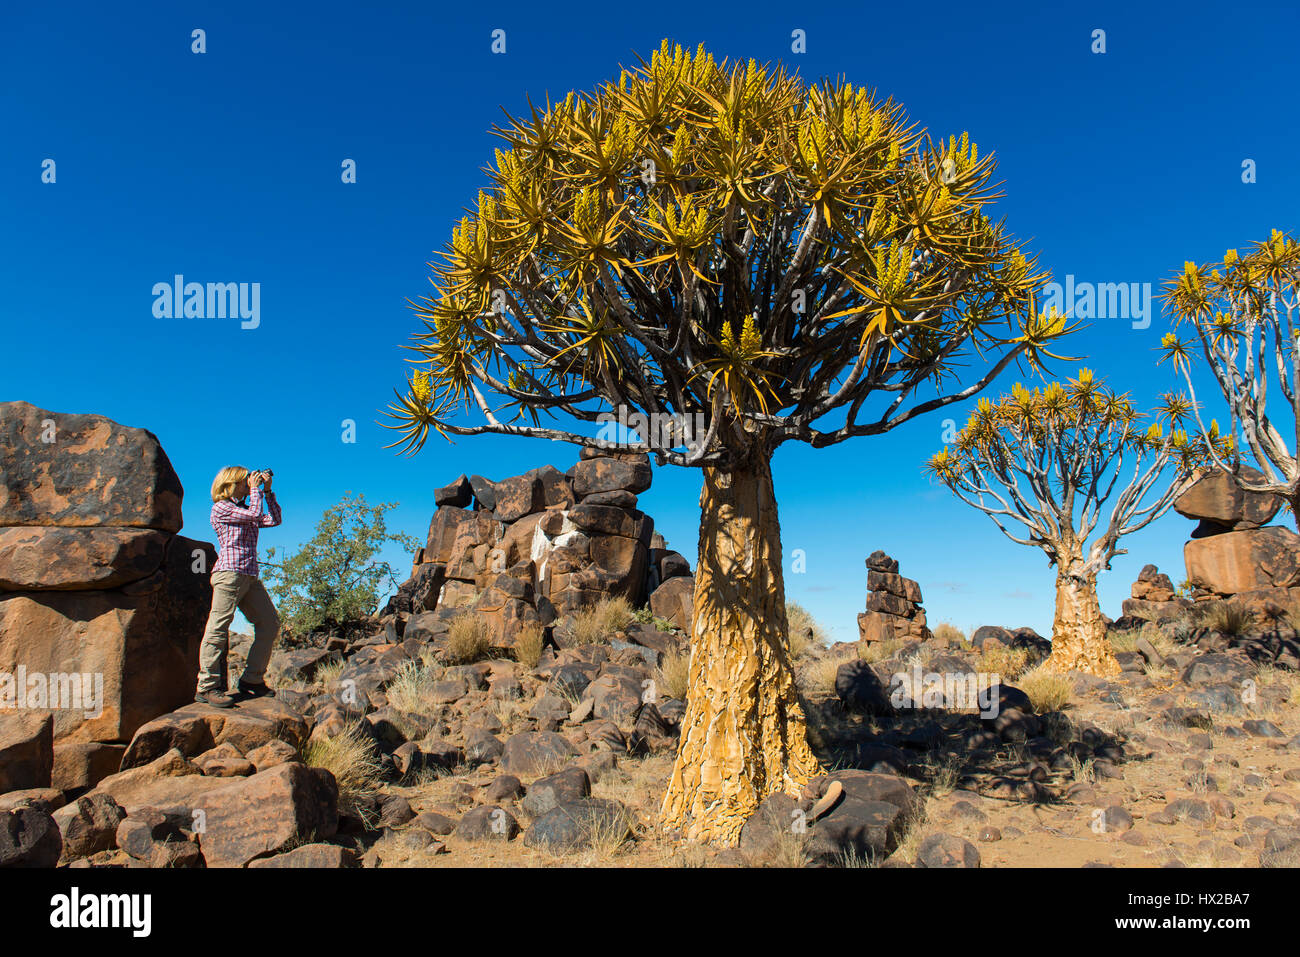 Woman takes pictures of the quiver trees forest (Aloe dichotoma) near Keetmanshoop, Namibia Stock Photo